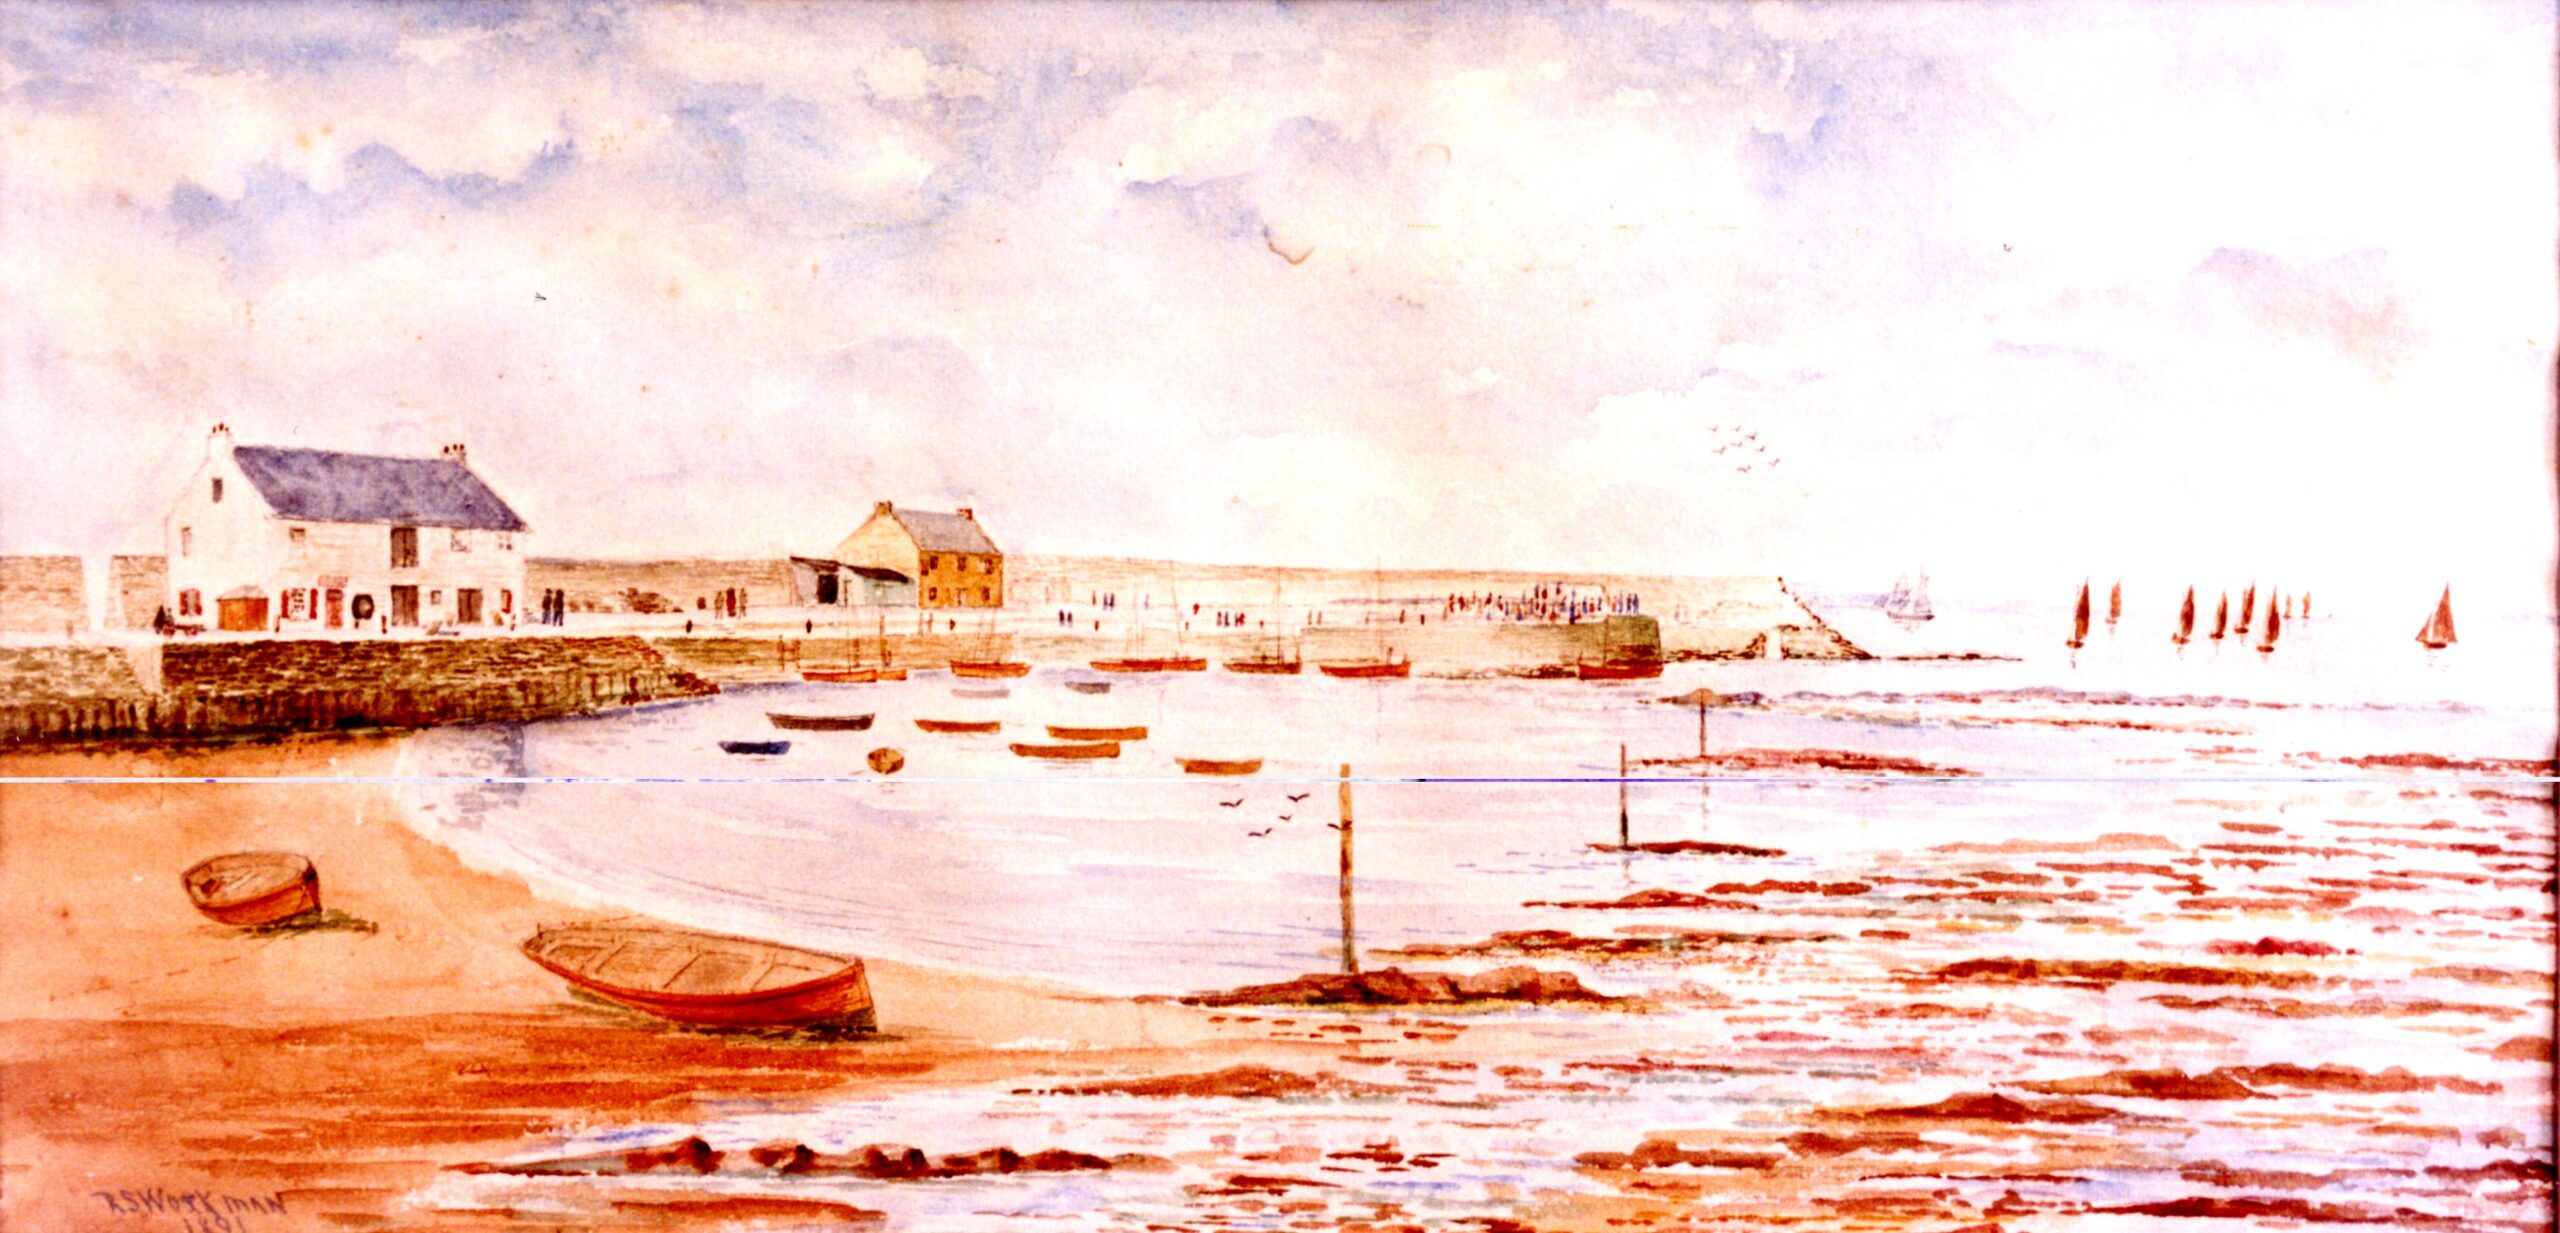 A water colour painting showing a beach scene by the sea with boats by the water and houses in the background.